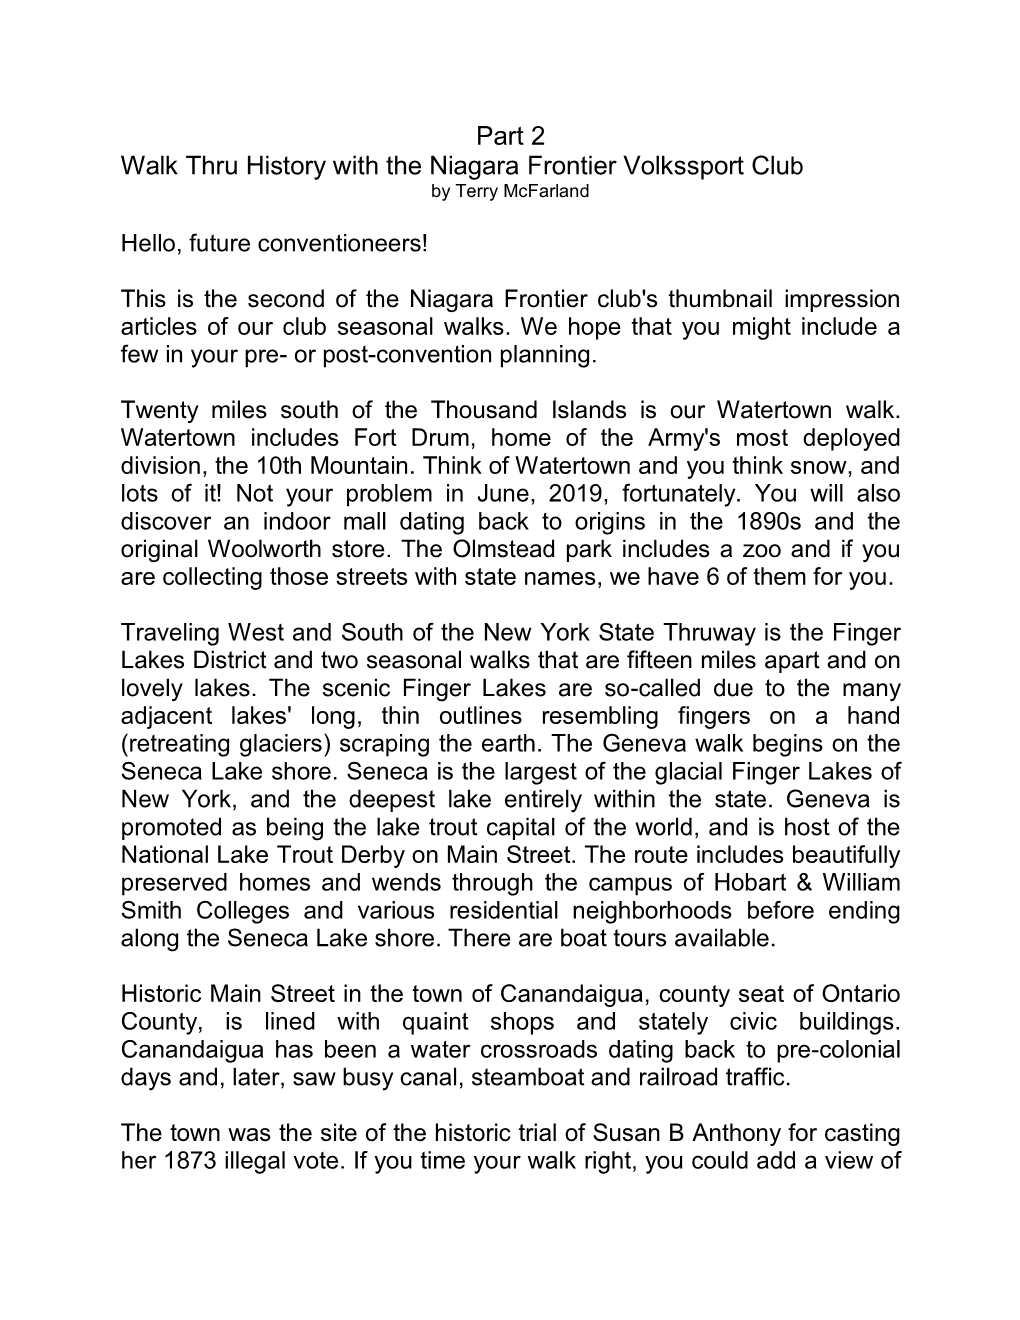 Part 2 Walk Thru History with the Niagara Frontier Volkssport Club by Terry Mcfarland